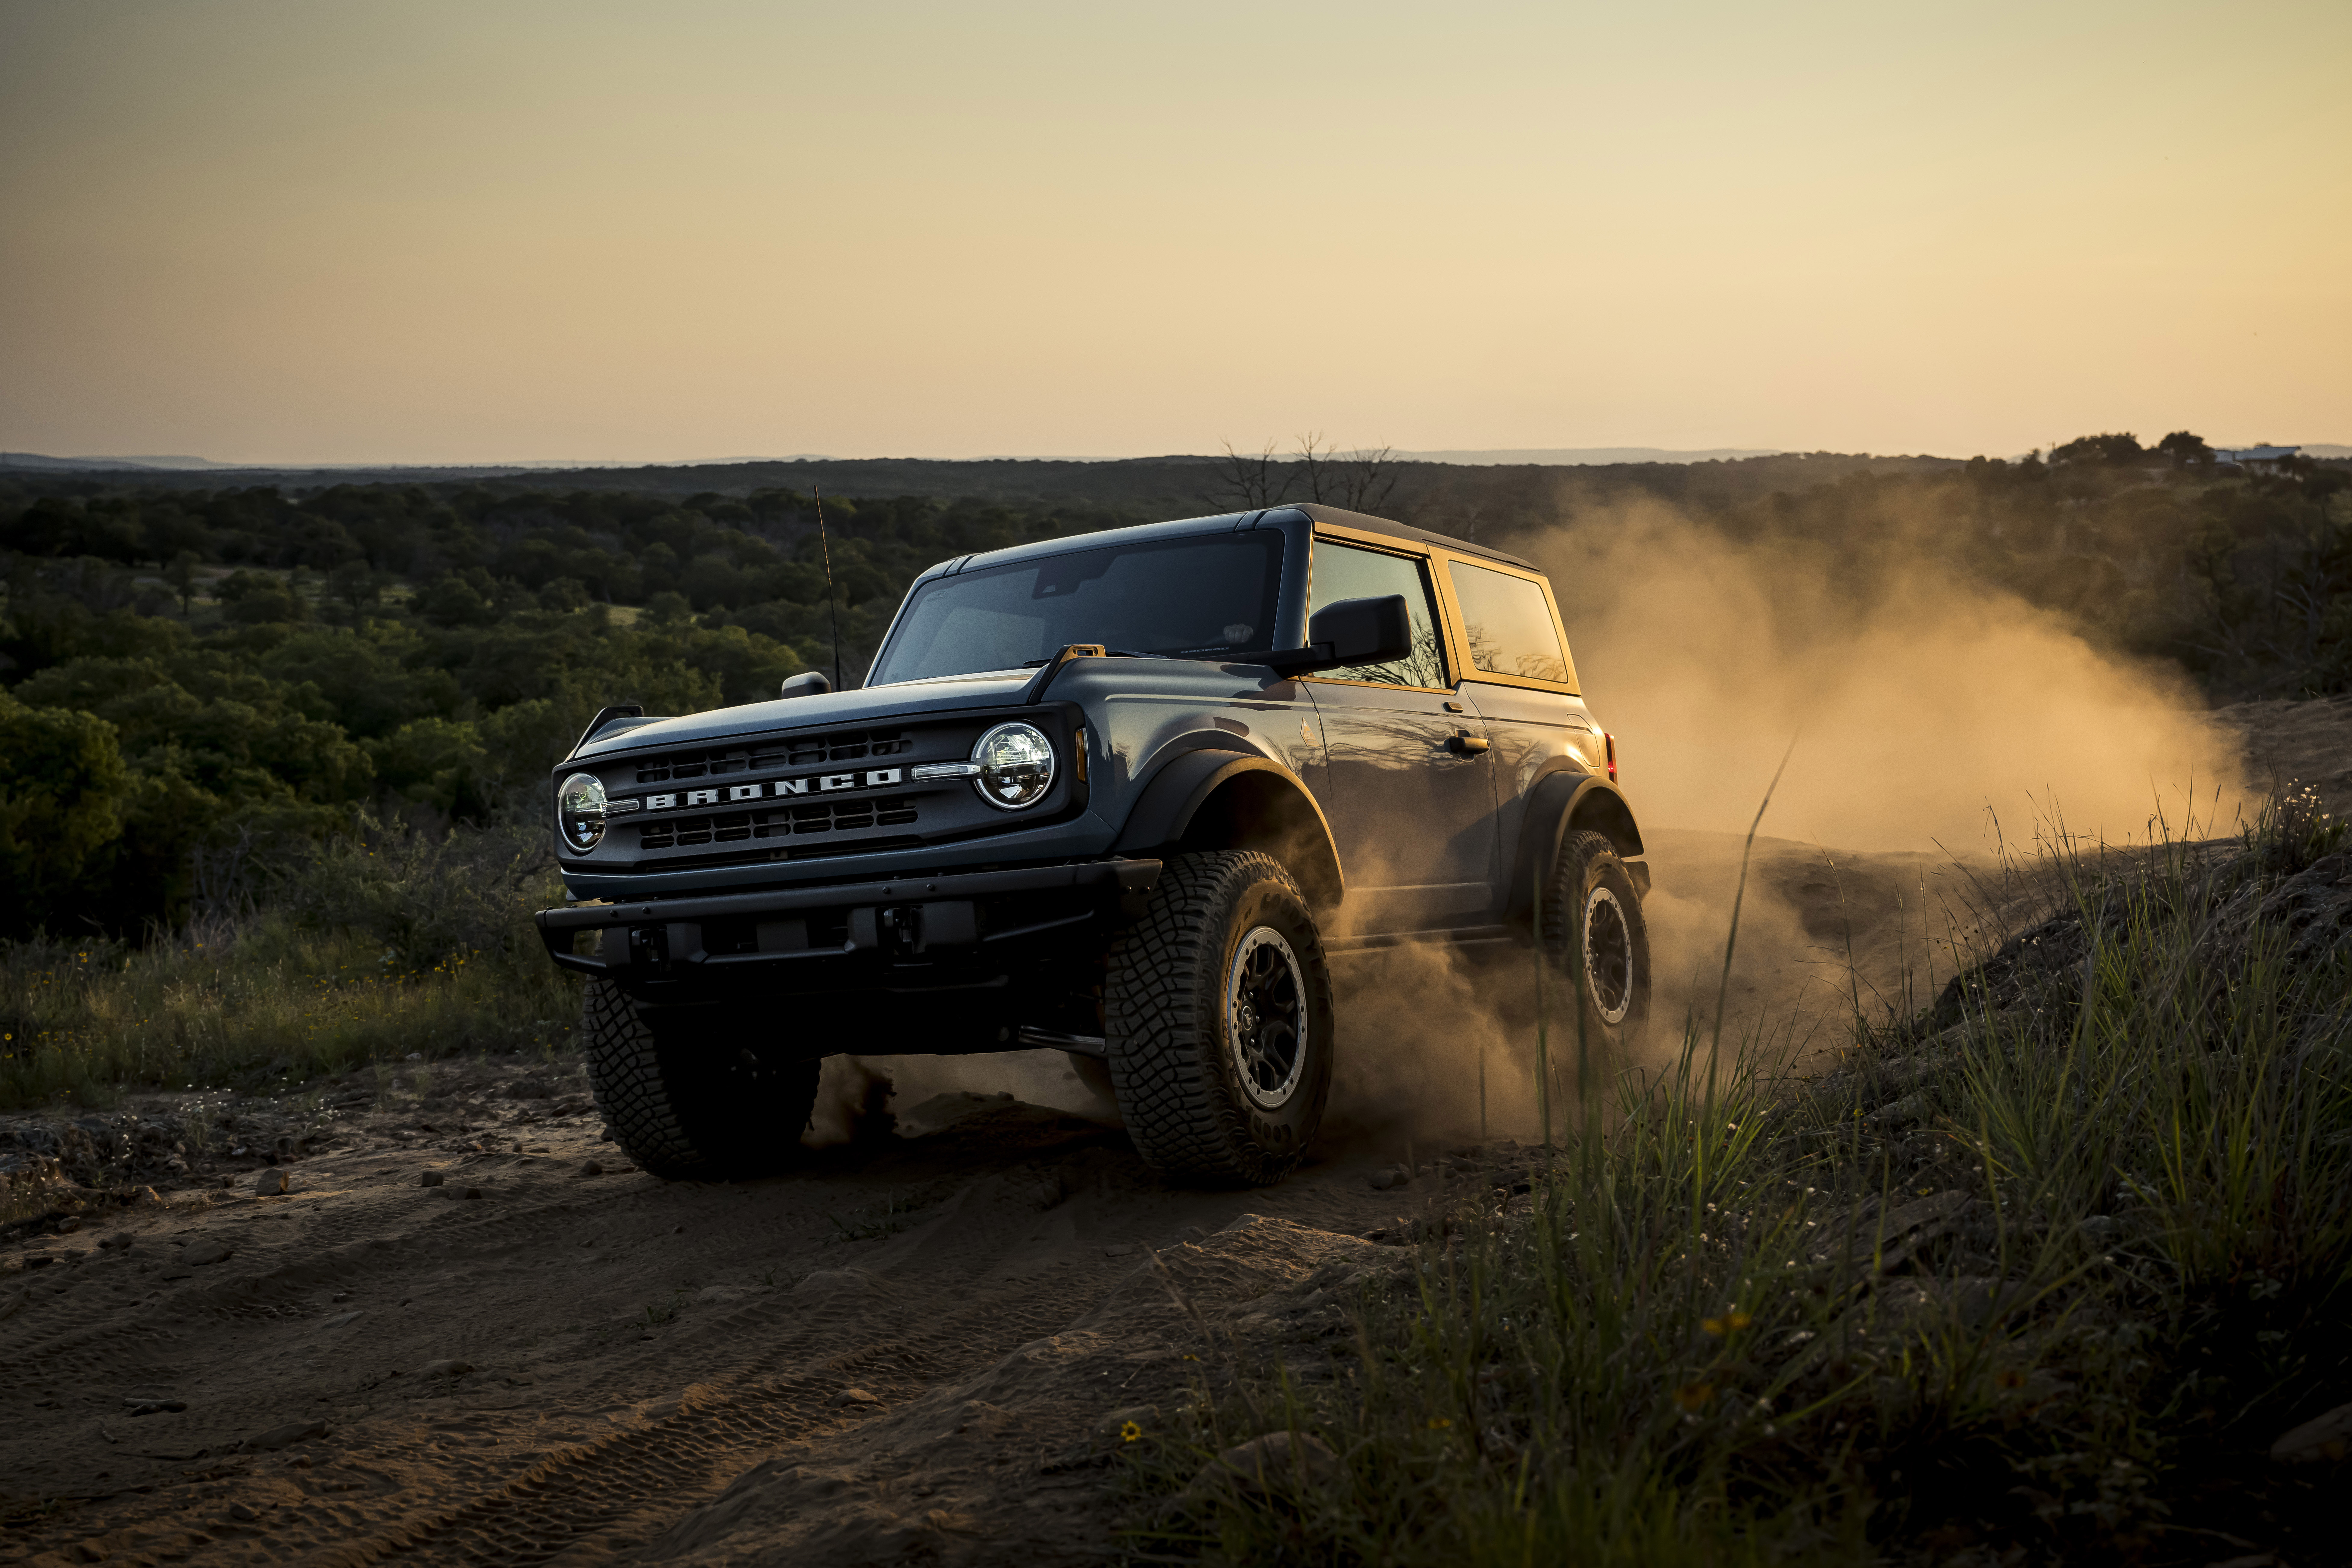 Ford's Bronco is being touted as the most capable 4x4 ever.